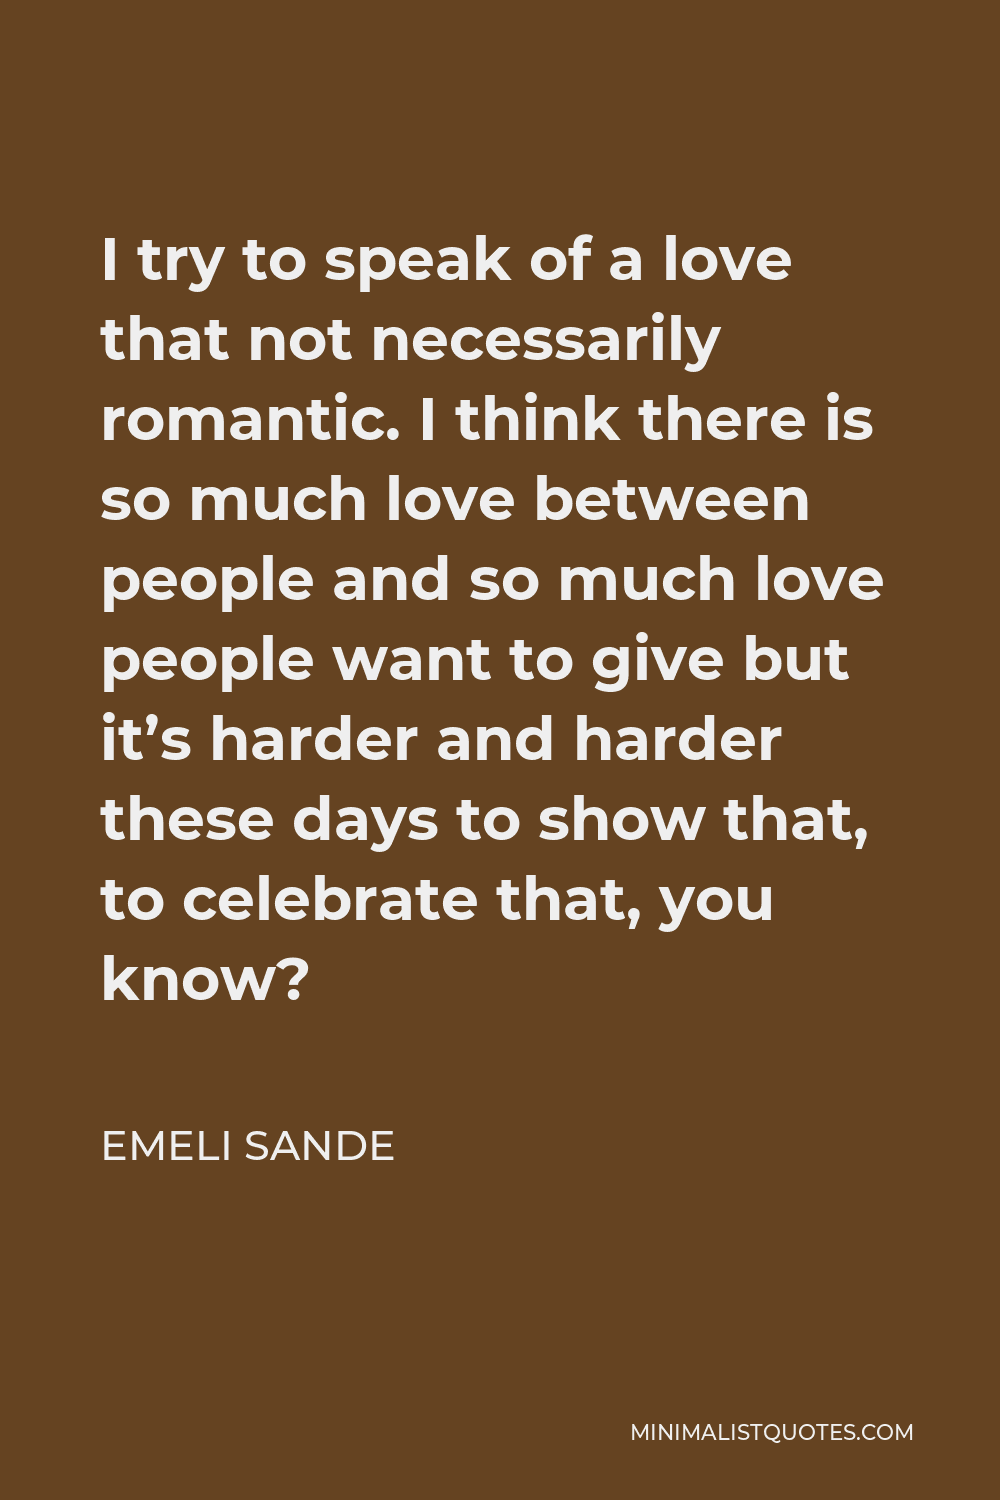 Emeli Sande Quote - I try to speak of a love that not necessarily romantic. I think there is so much love between people and so much love people want to give but it’s harder and harder these days to show that, to celebrate that, you know?